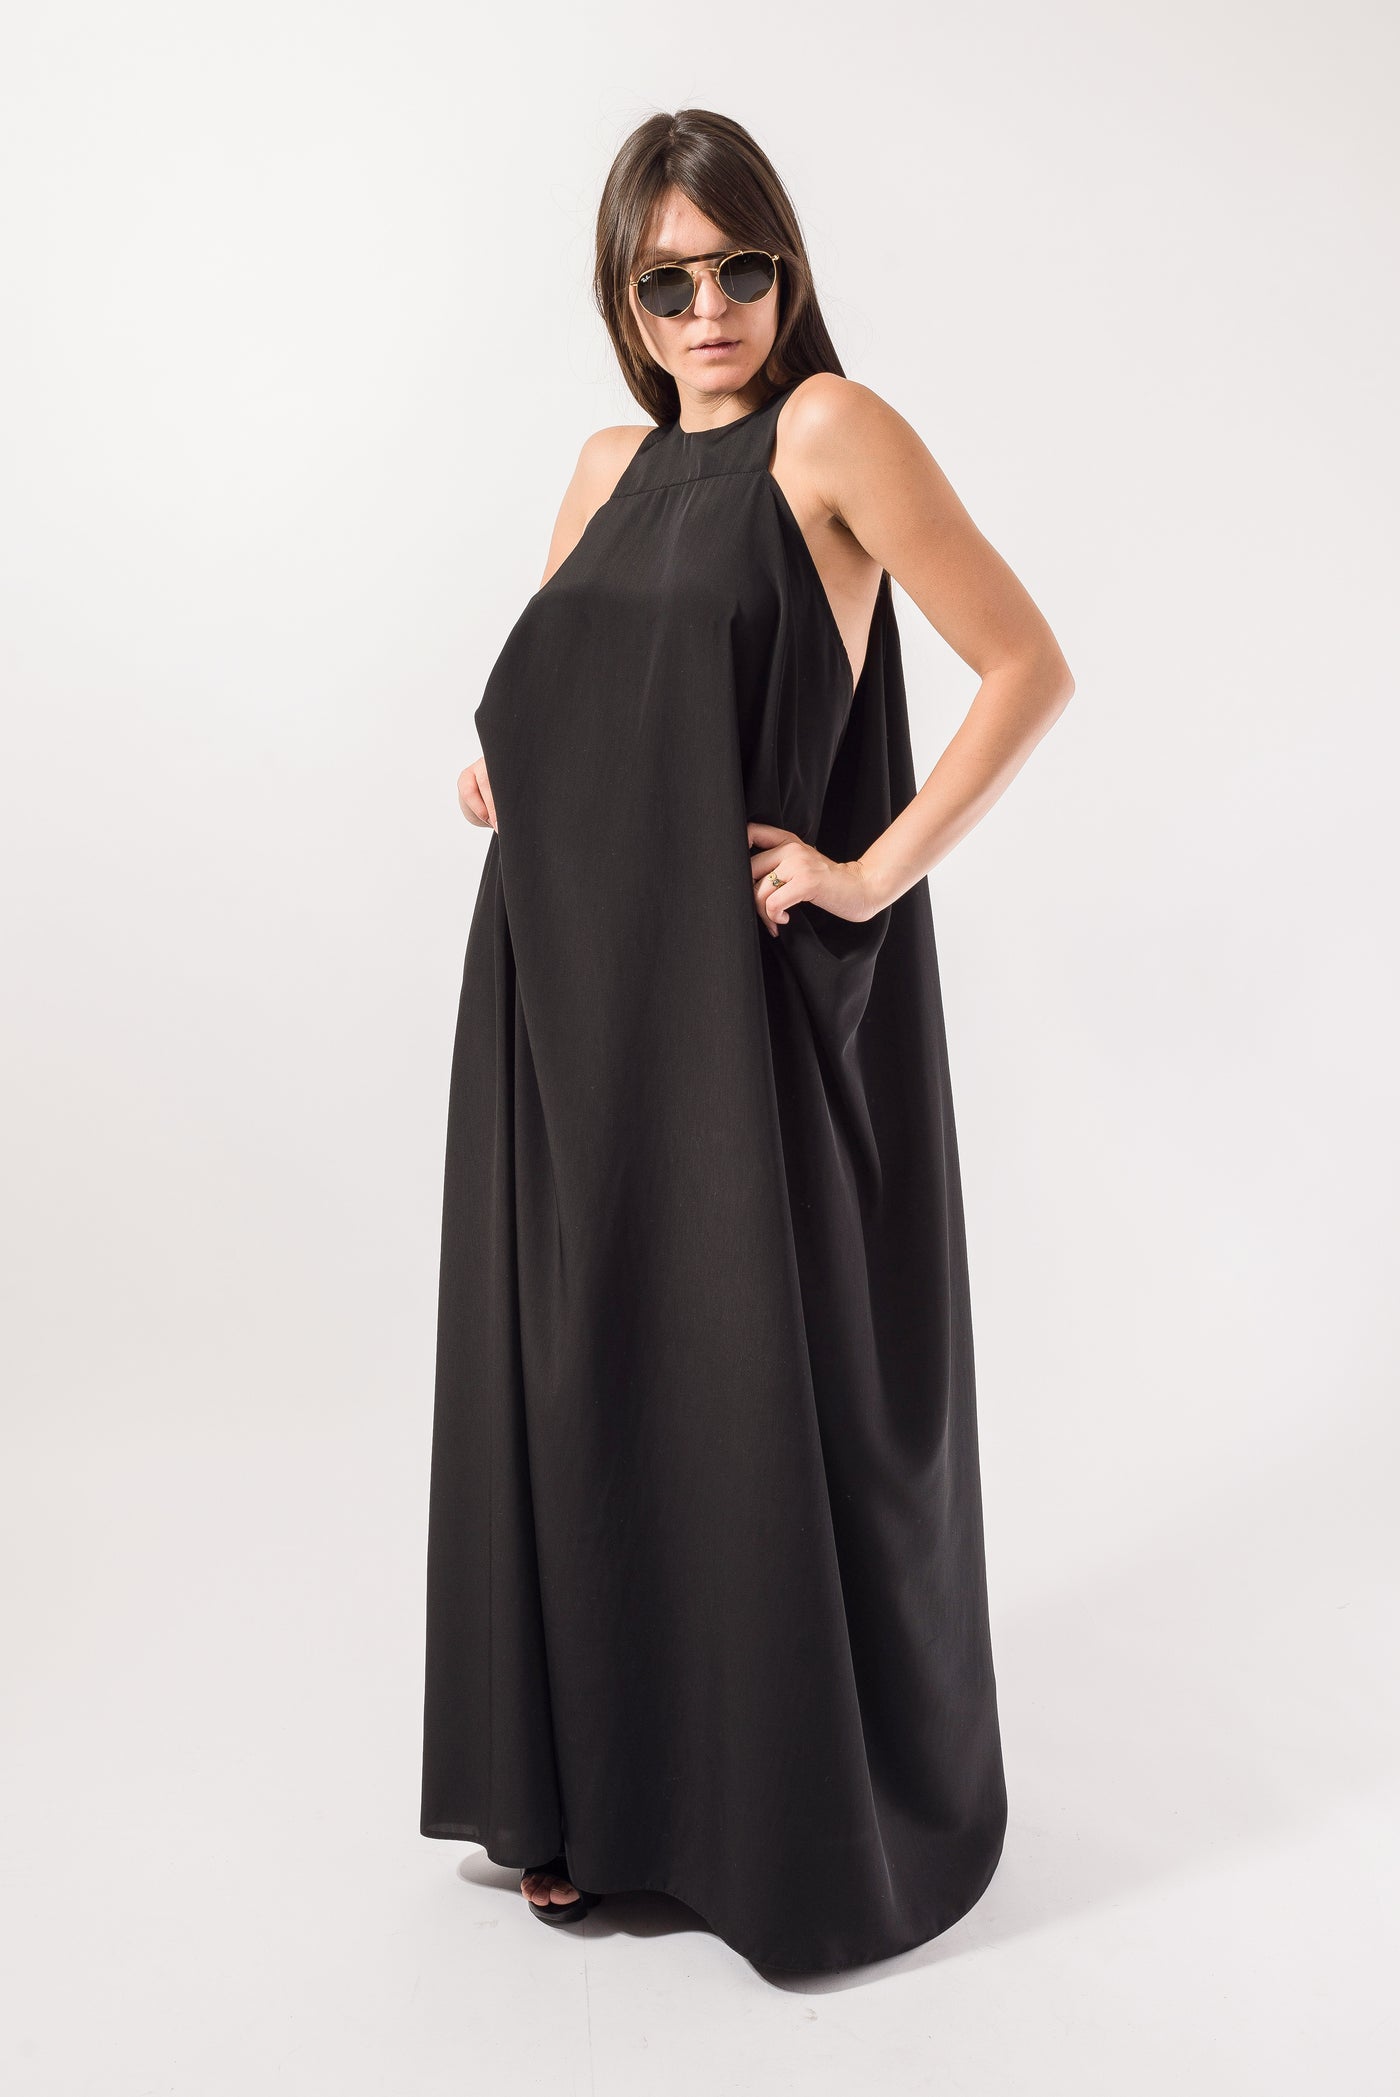 Black maxi dress with open back F1829